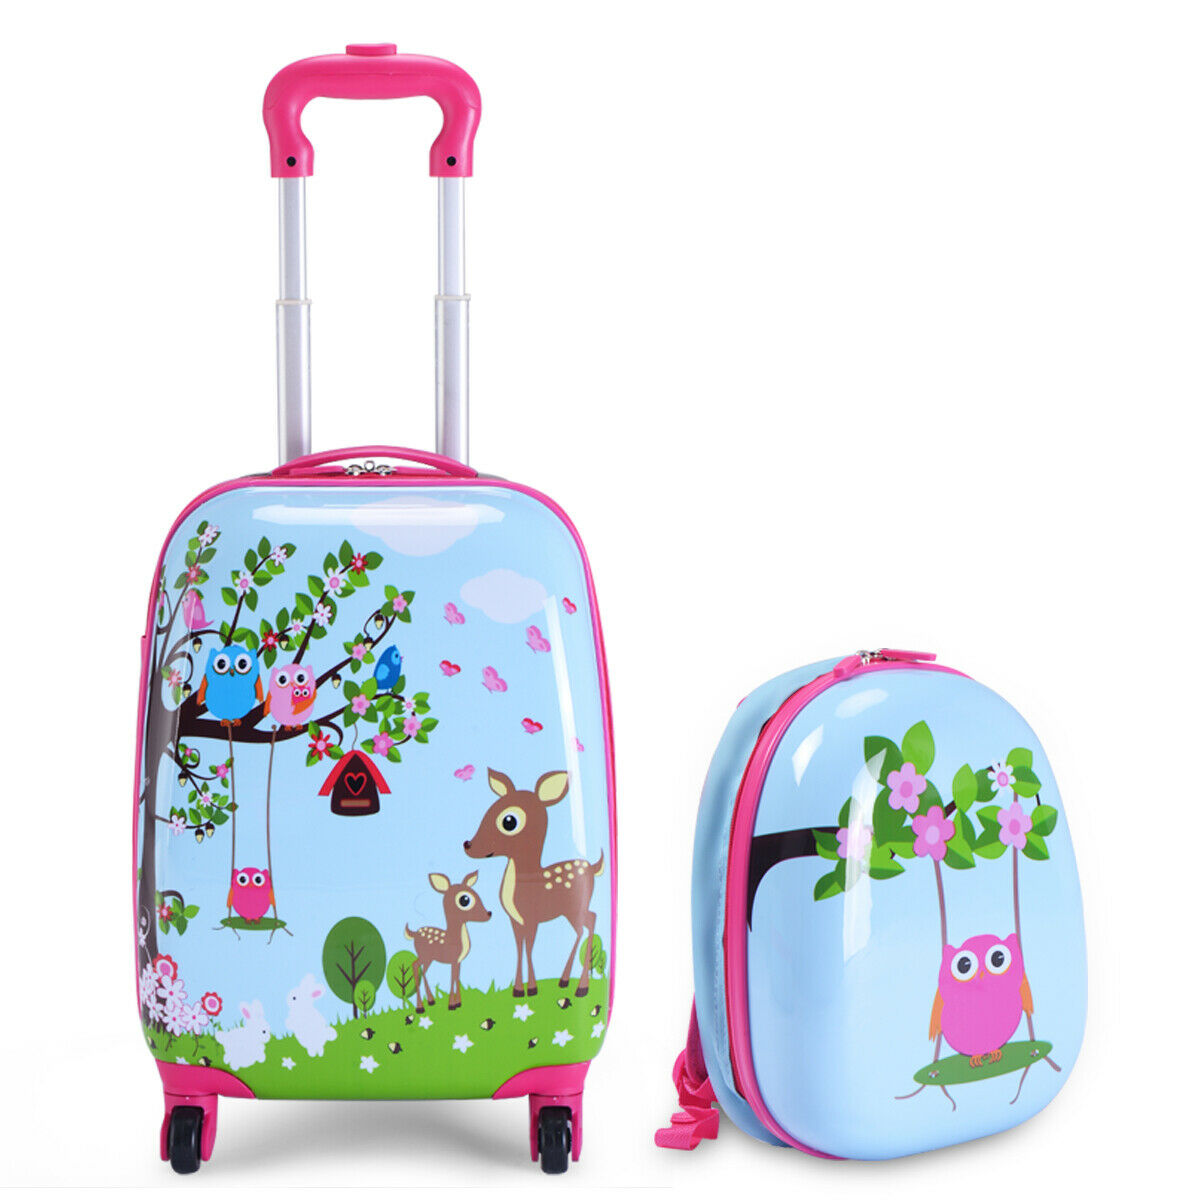 Costway 2Pcs 12'' 16'' Kids Luggage Set Suitcase Backpack School Travel Trolley ABS - image 1 of 10